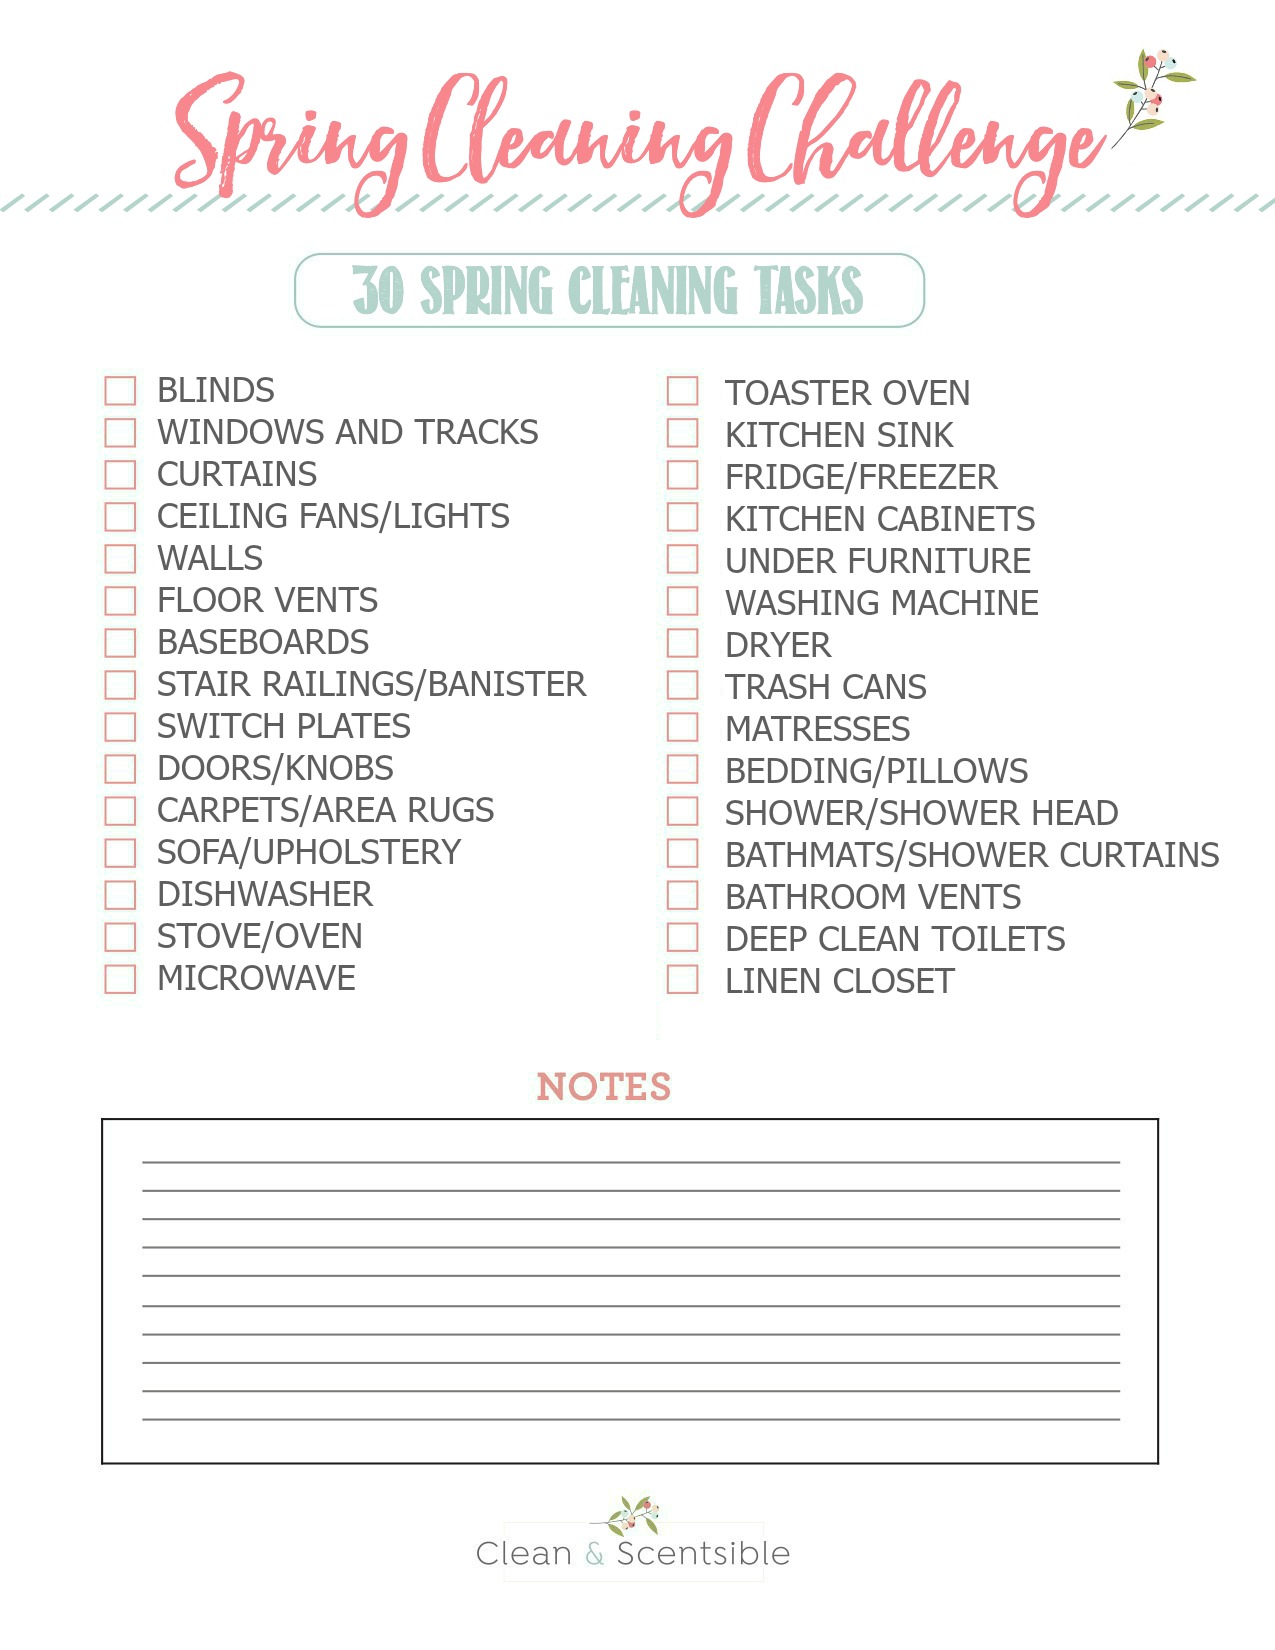 https://www.cleanandscentsible.com/wp-content/uploads/2020/04/Spring-Cleaning-Challenge.jpg